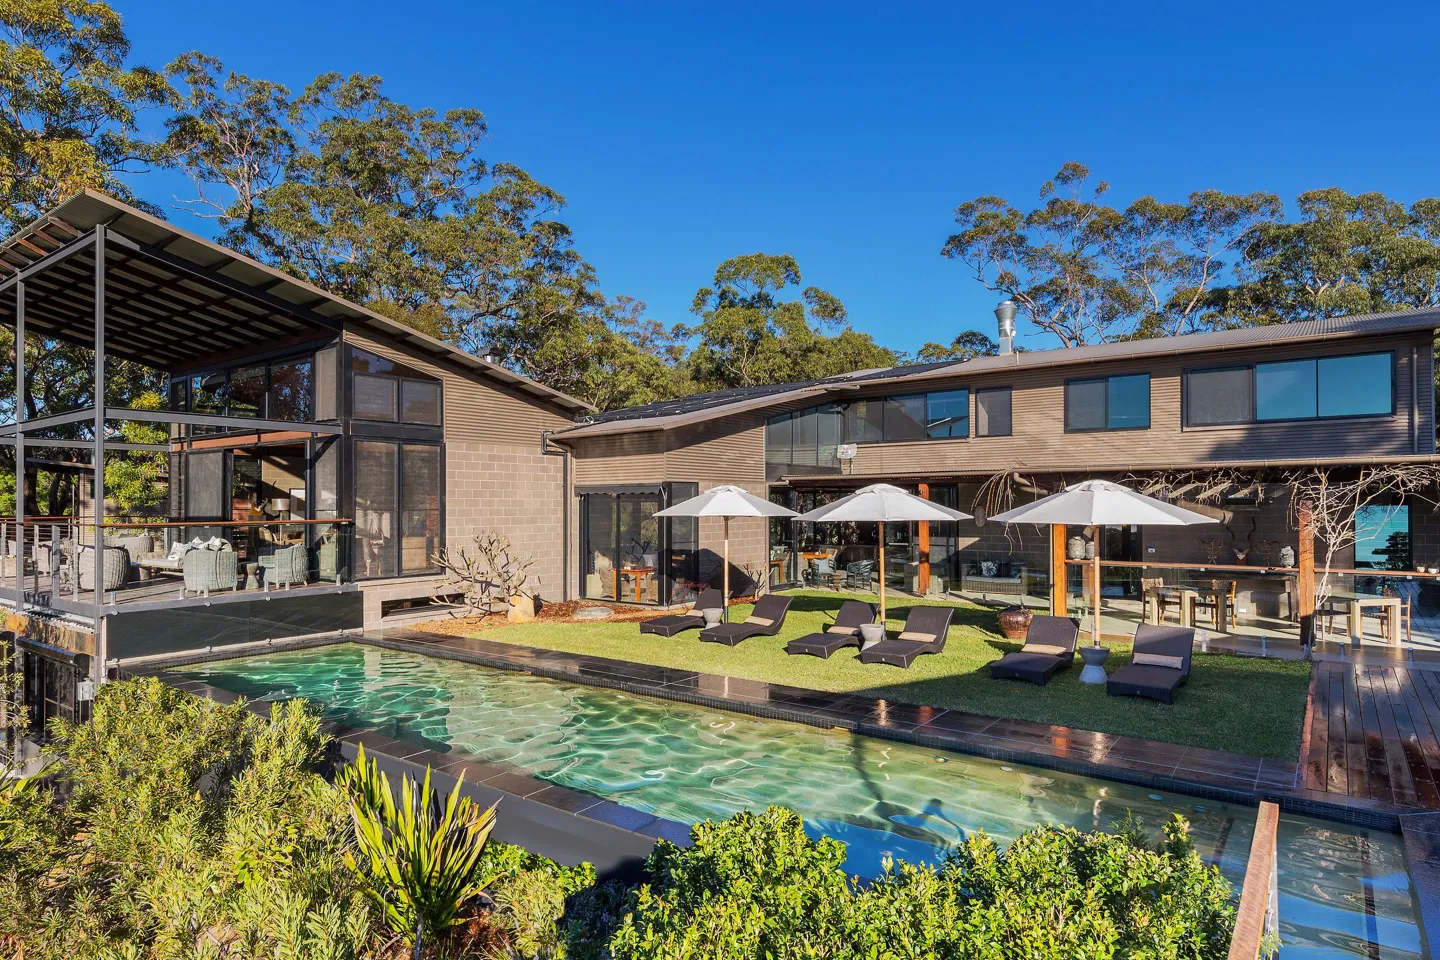 Stay at Spicers Sangoma on a luxury holiday in regional NSW